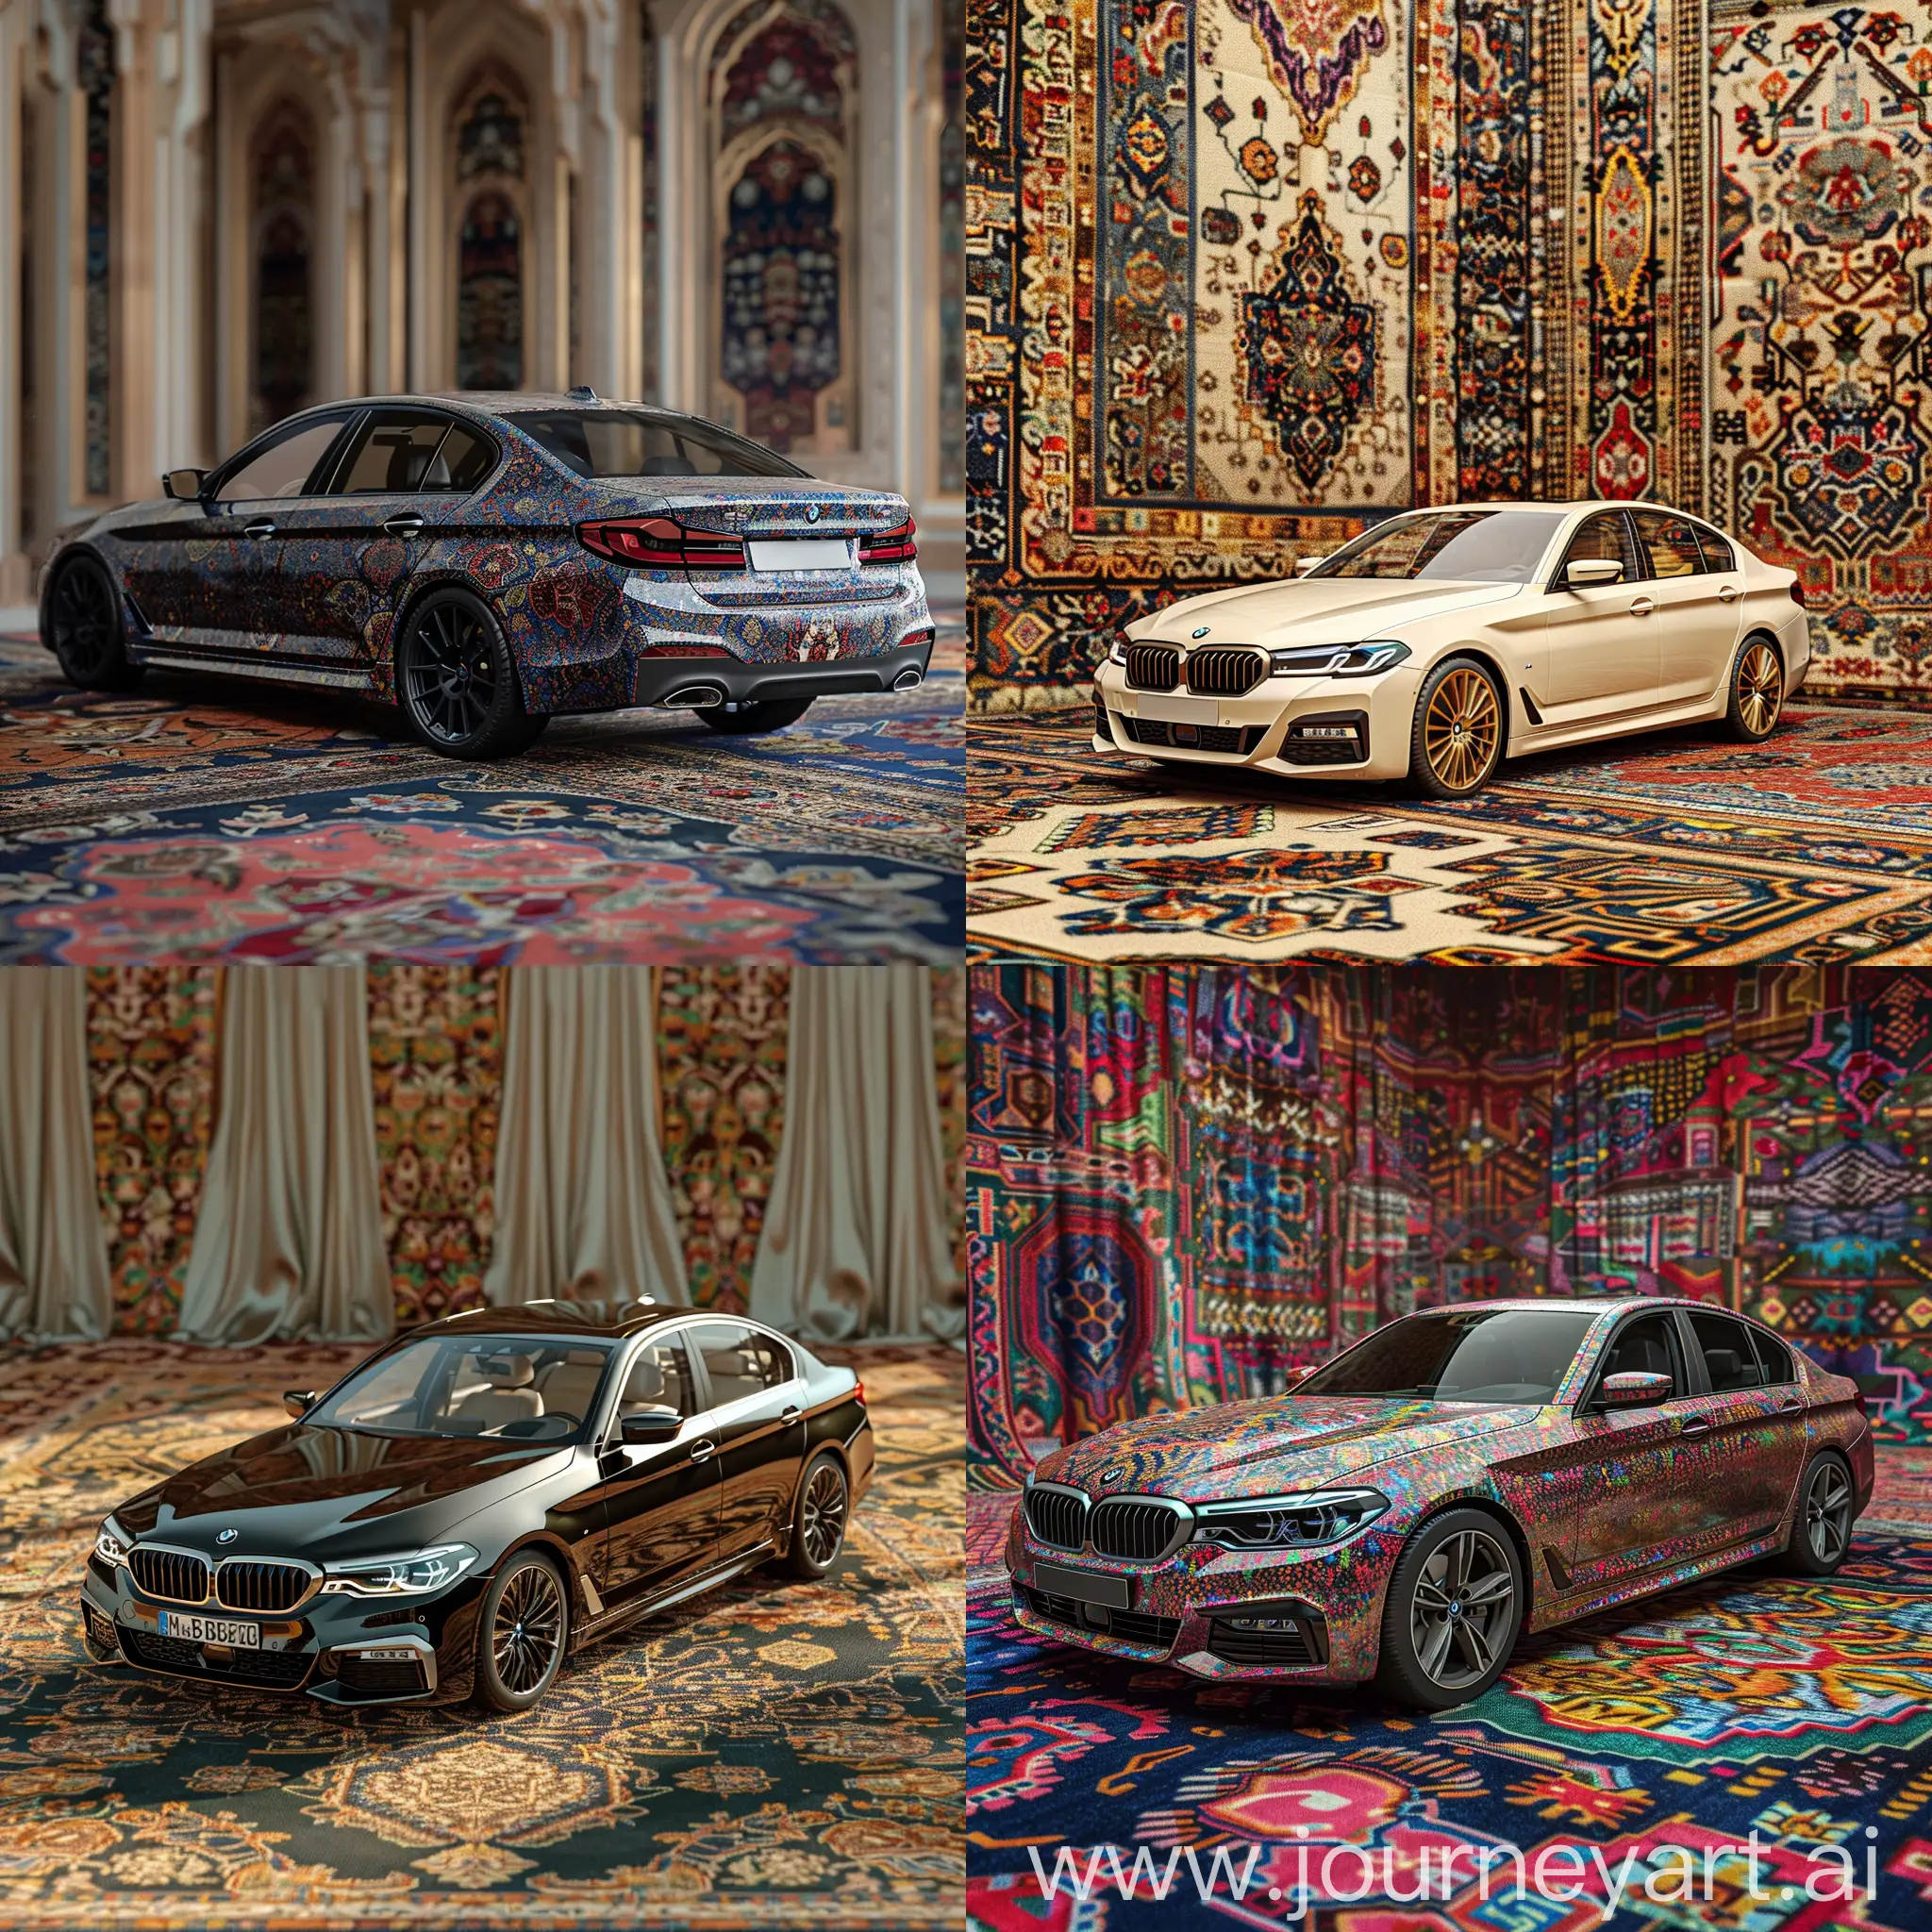 BMW-530-Car-with-Iranian-Carpet-Design-in-Natural-3D-Exhibition-Setting